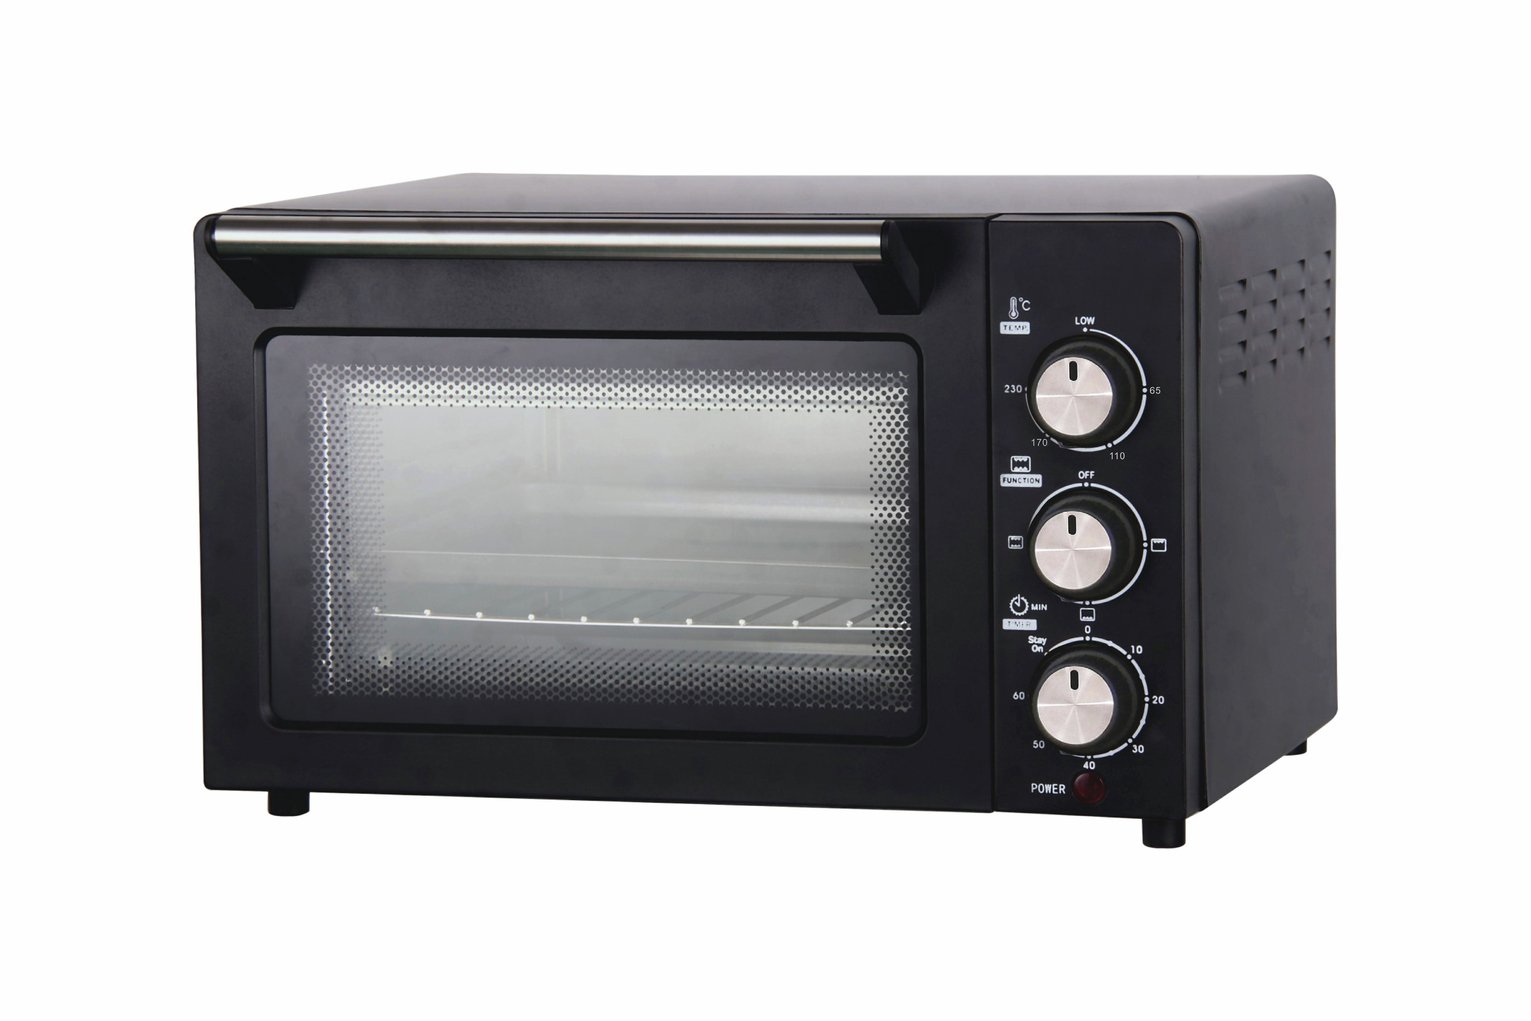 Leisurewize 14L Low Wattage Electric Oven